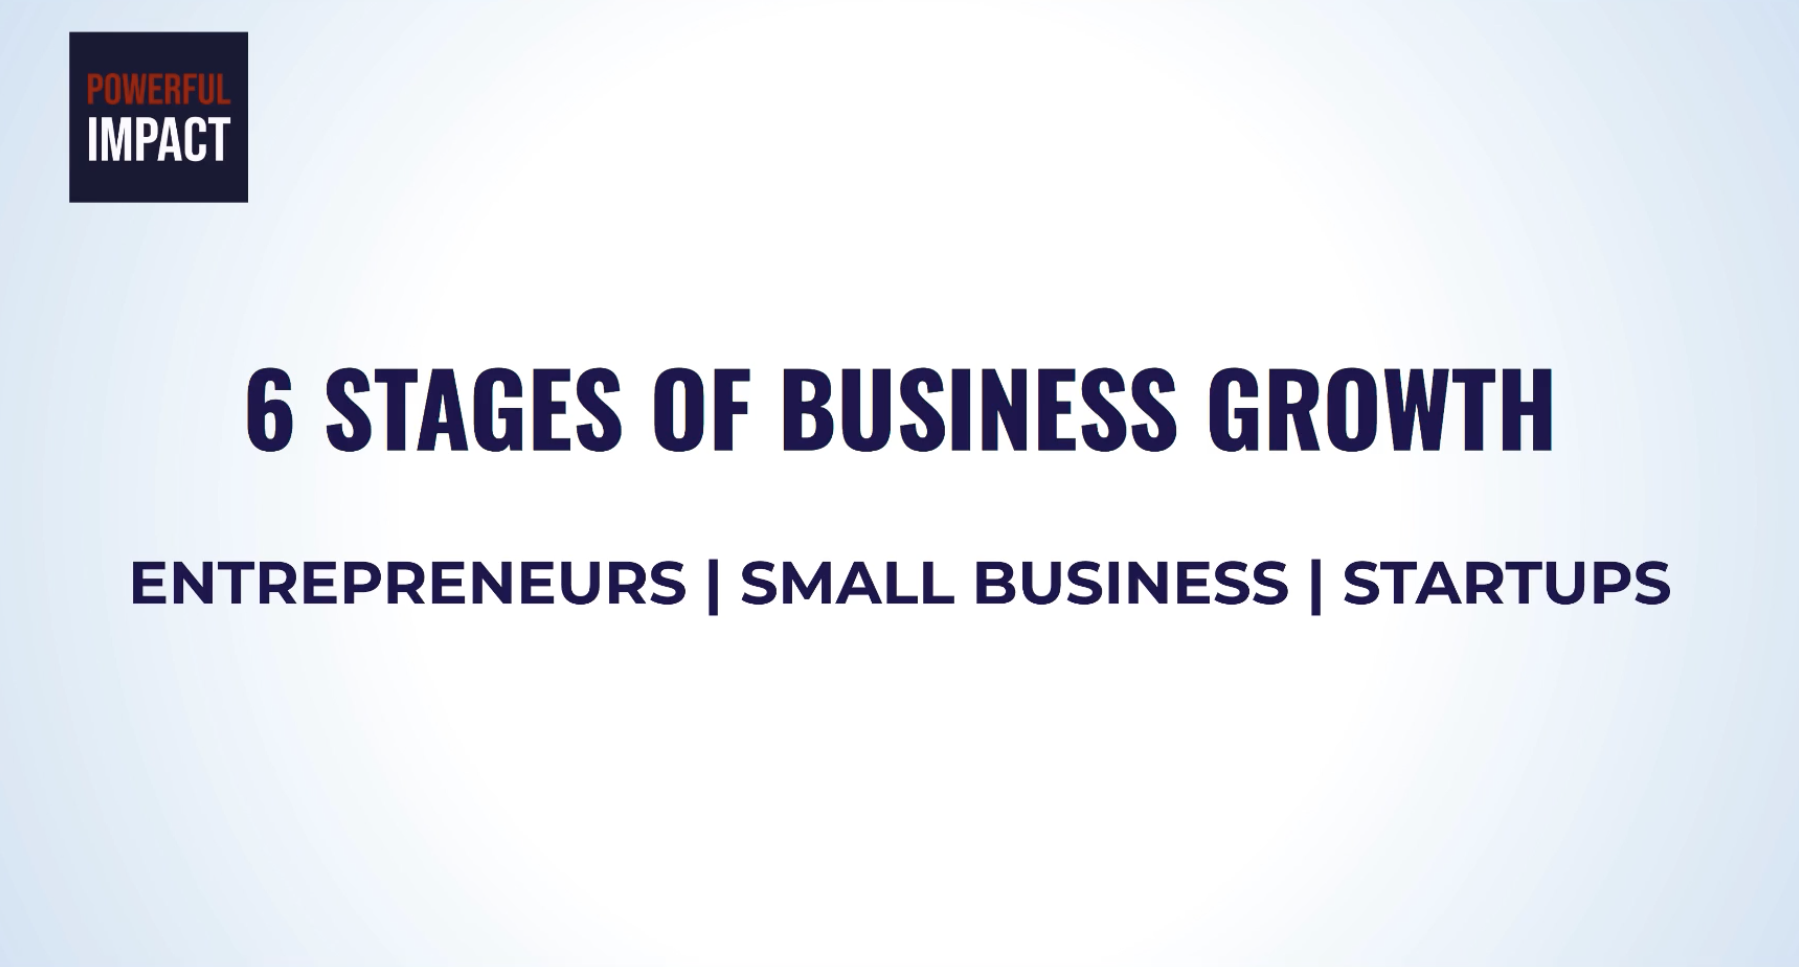 Image of 6 Stages of Business Growth